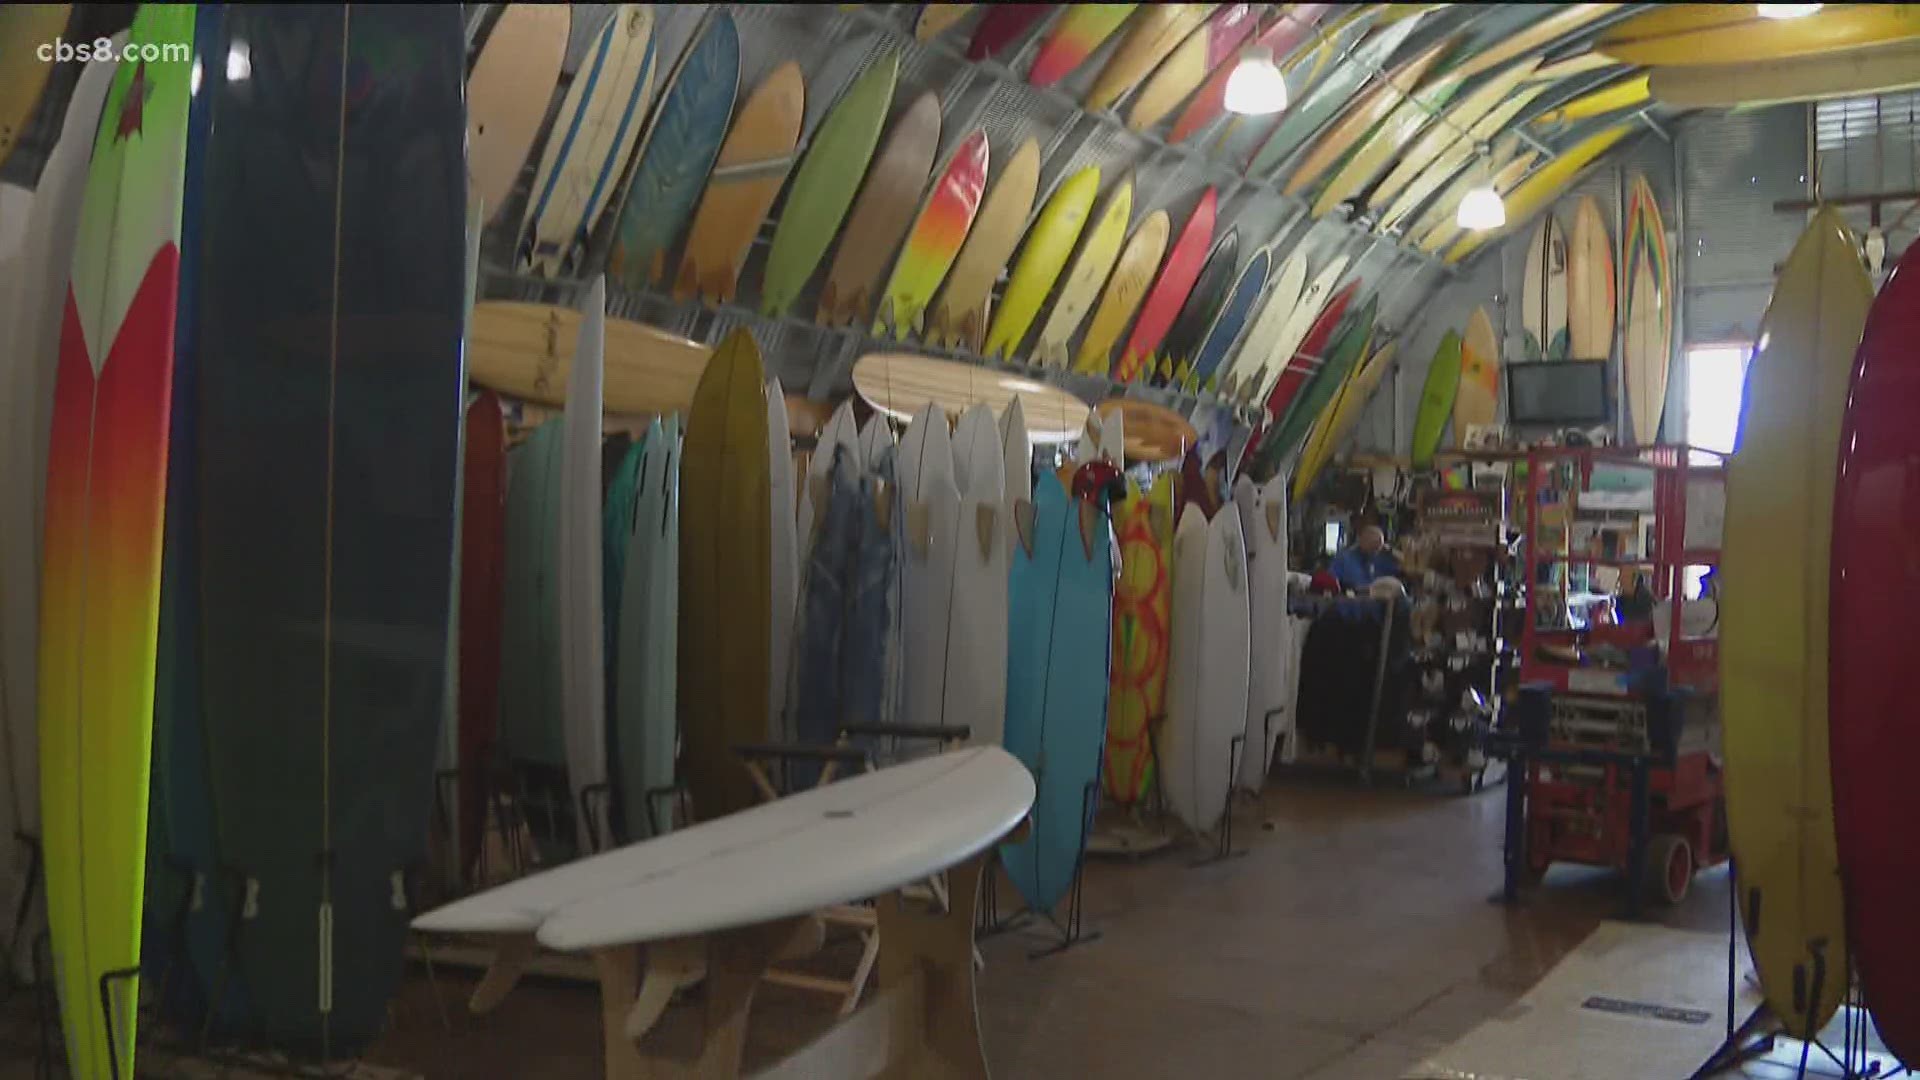 Surf shops like other San Diego small businesses have been hit hard not only by the coronavirus economic impact, but also due to stay-at-home orders.